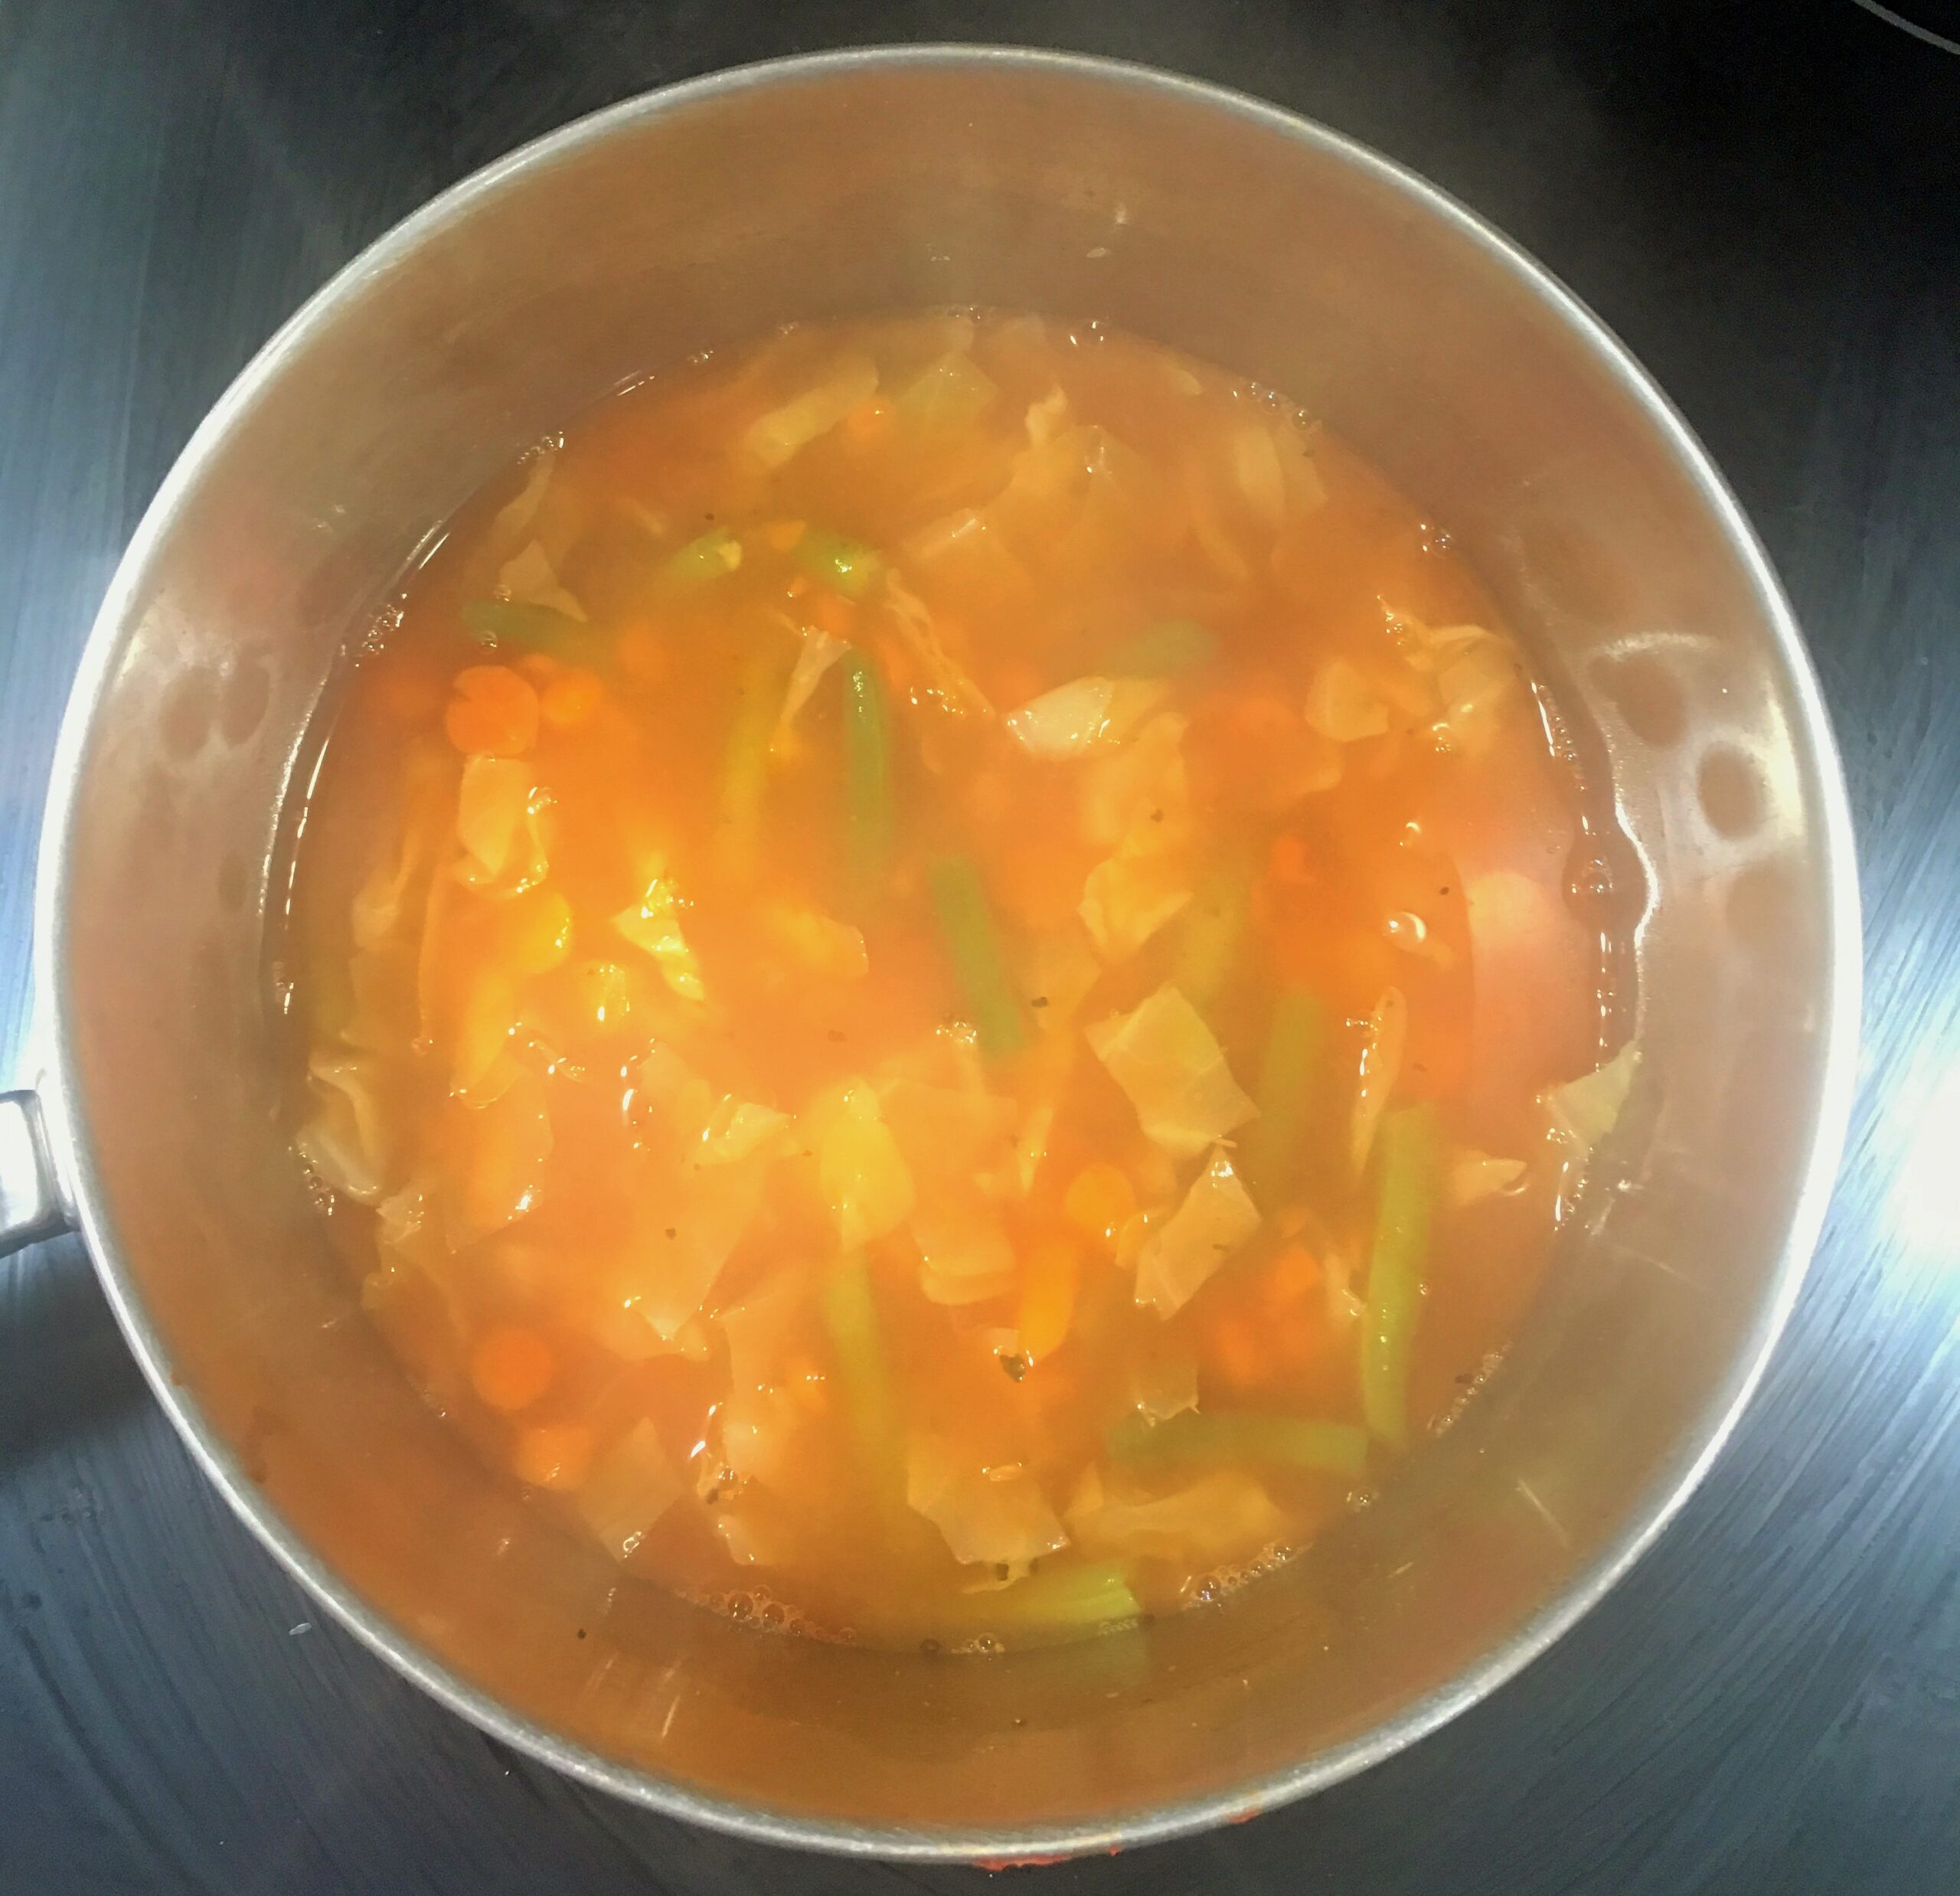 Weight Watchers Cabbage Soup Recipe